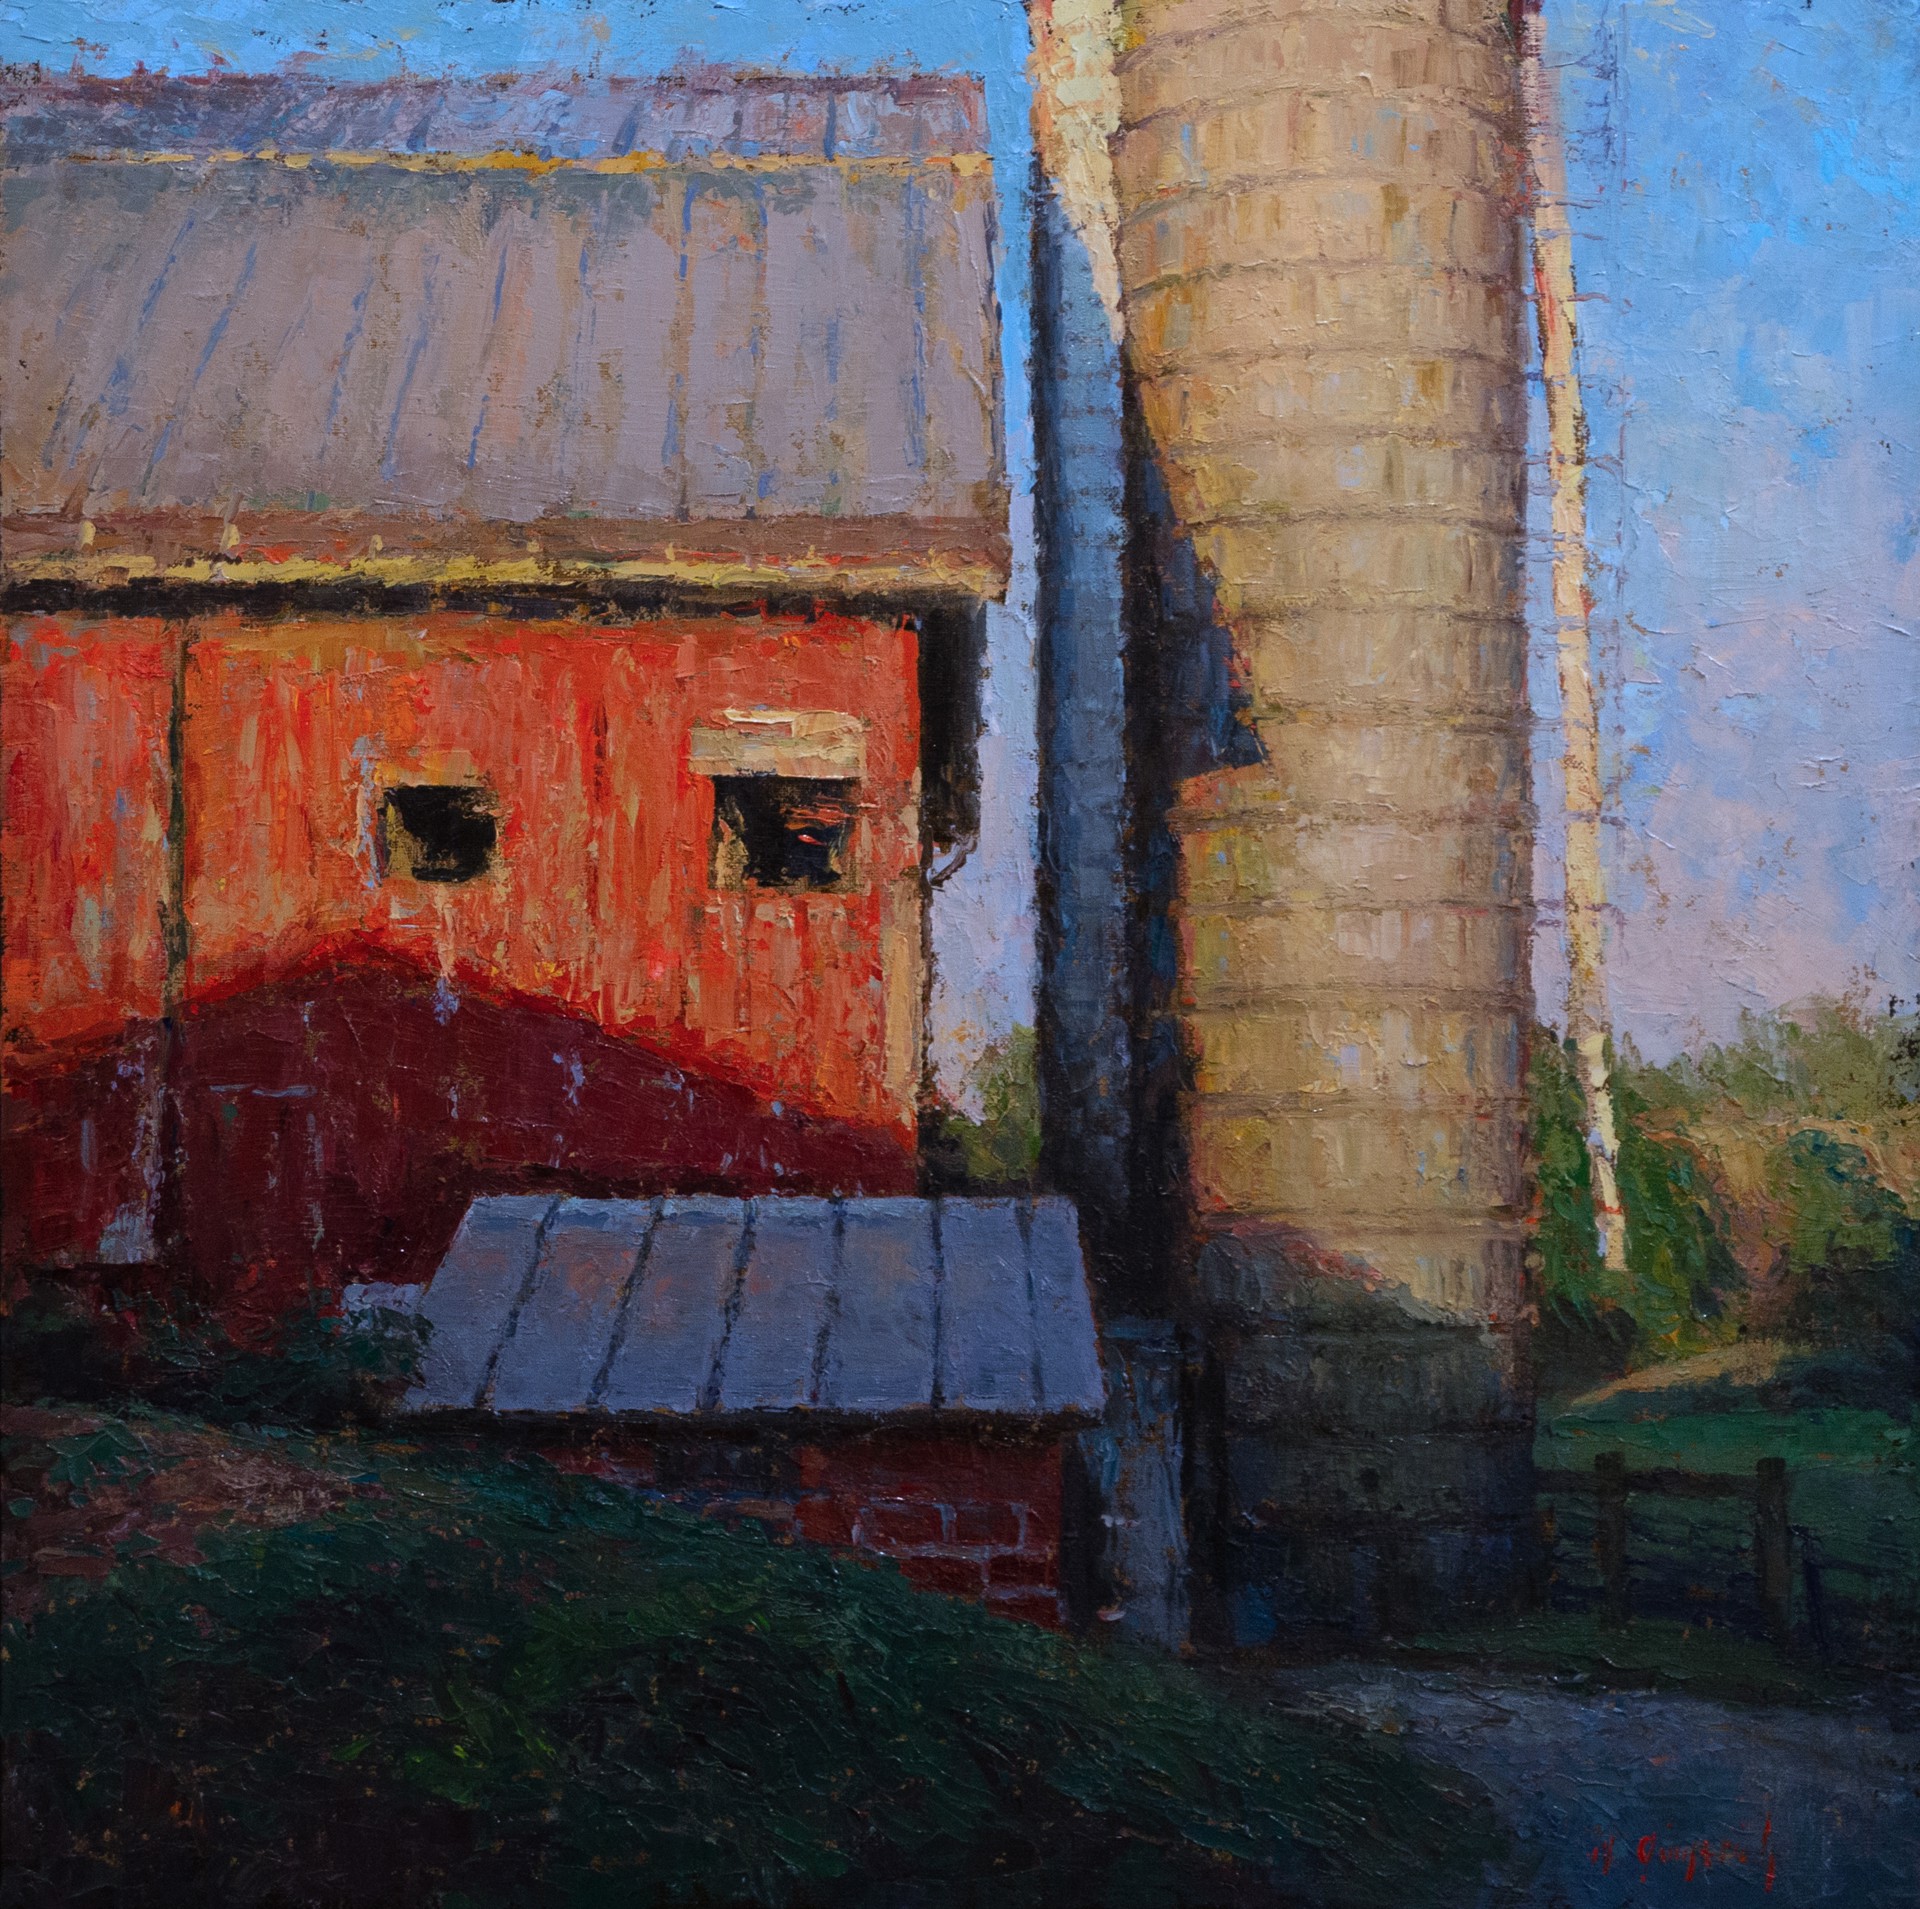 The Red Barn by Mark Gingerich